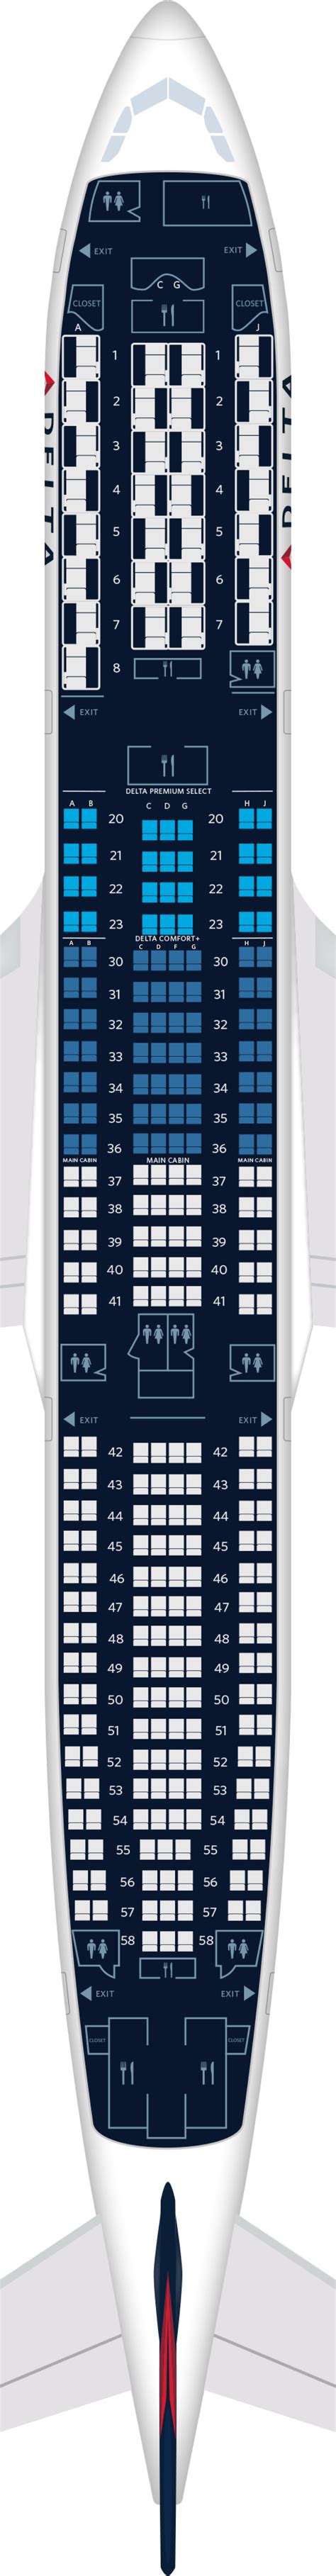 get airbus seat map airbus way my xxx hot girl